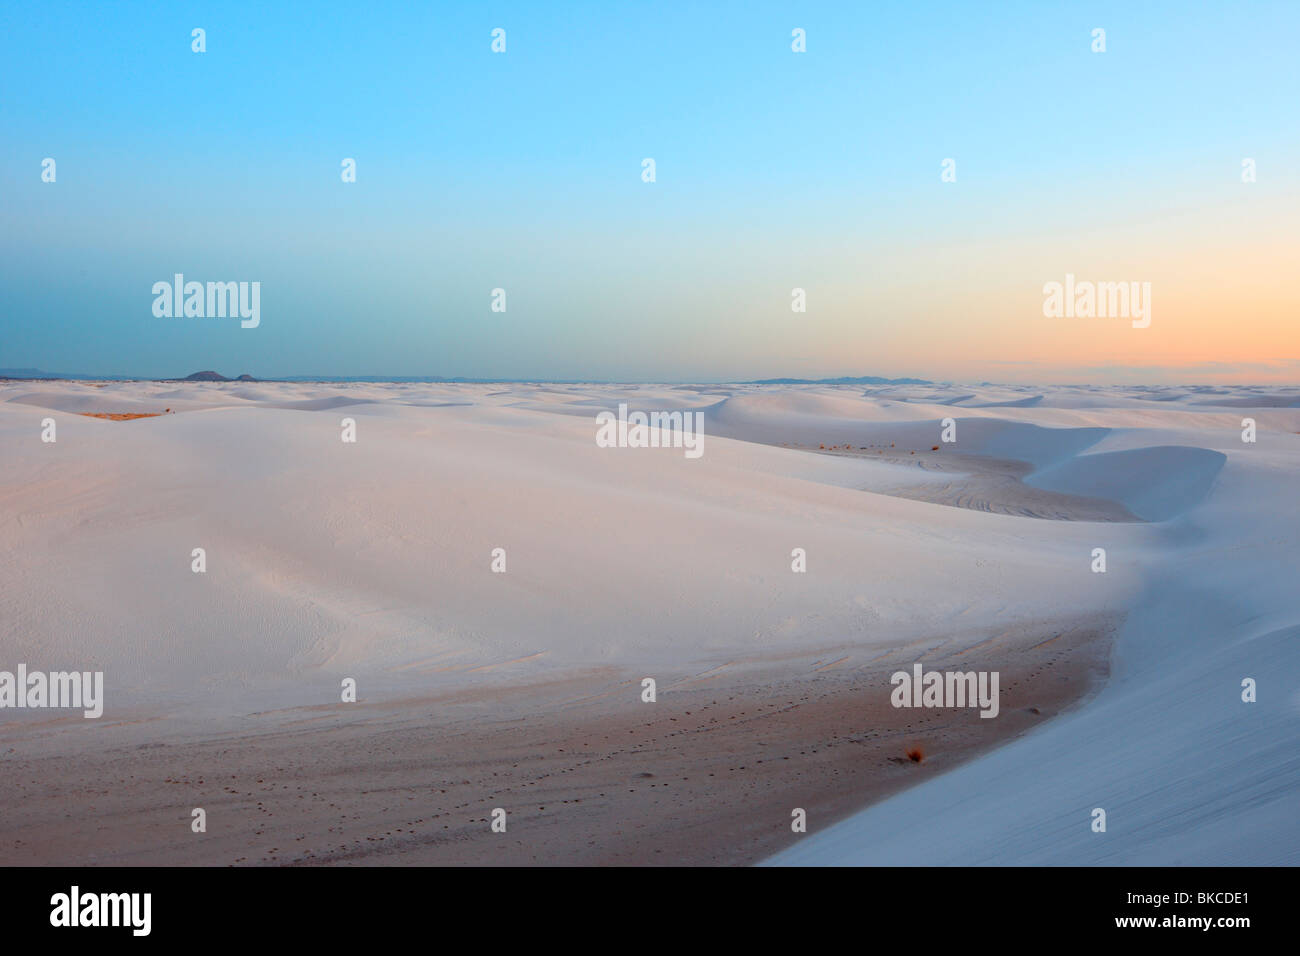 White Sands National Monument, Nuovo Messico. Foto Stock